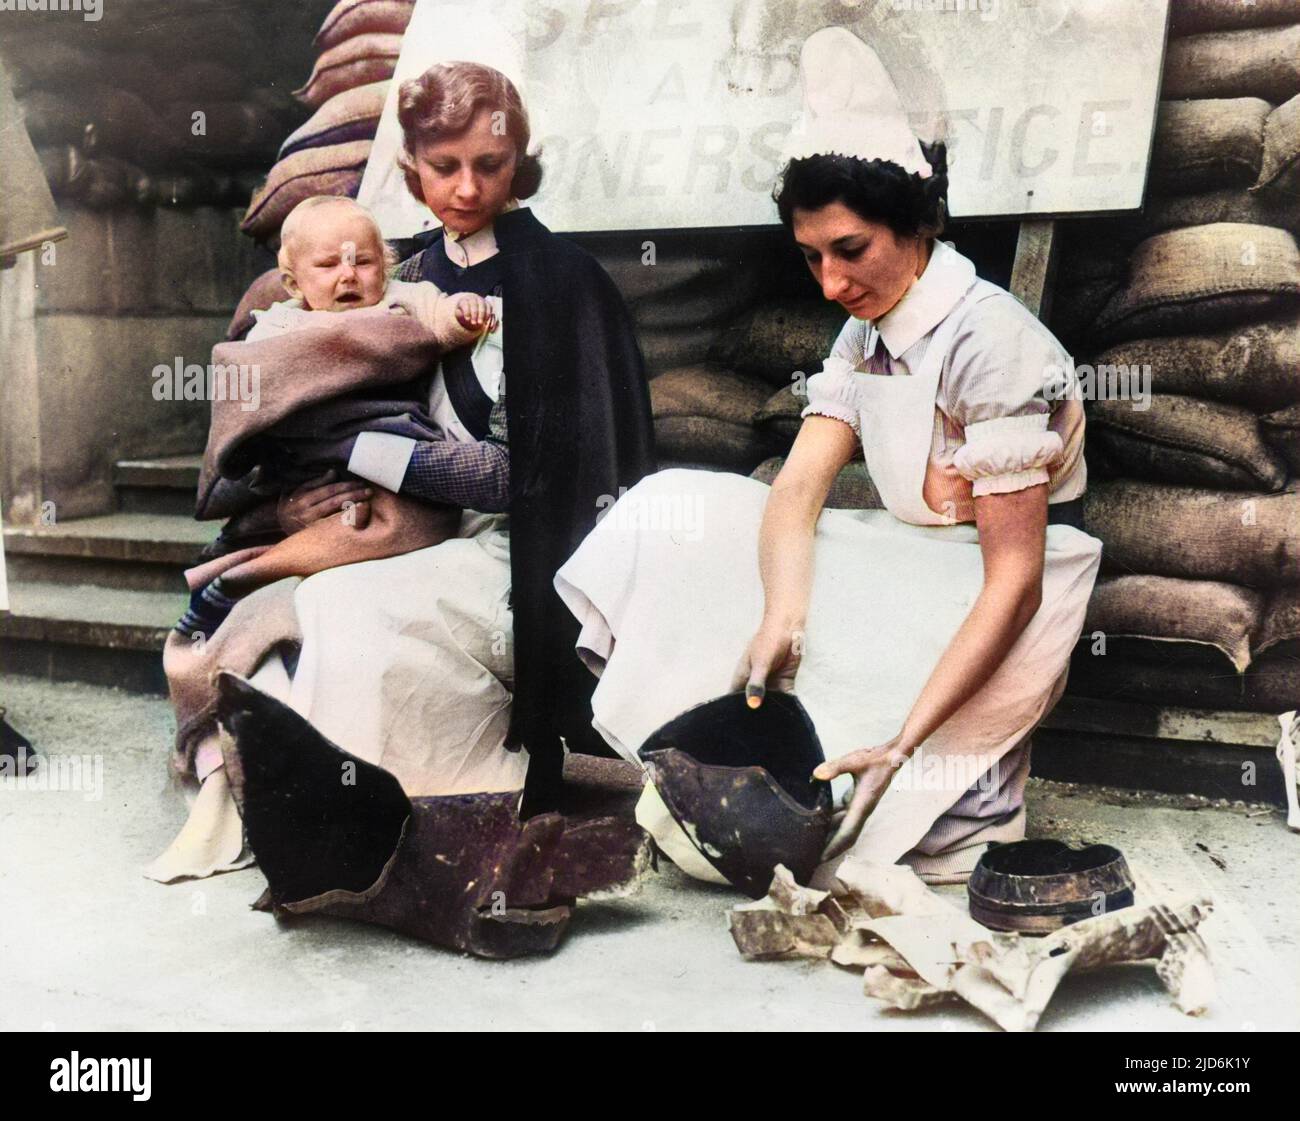 Nurses from The Great Ormond Street Children's Hospital examine fragments from the bomb which struck the building but (thankfully) caused no loss of life - September, 1940. The sign reads: Dispensary and Almoner's Office Colourised version of: 10922935       Date: 1940 Stock Photo